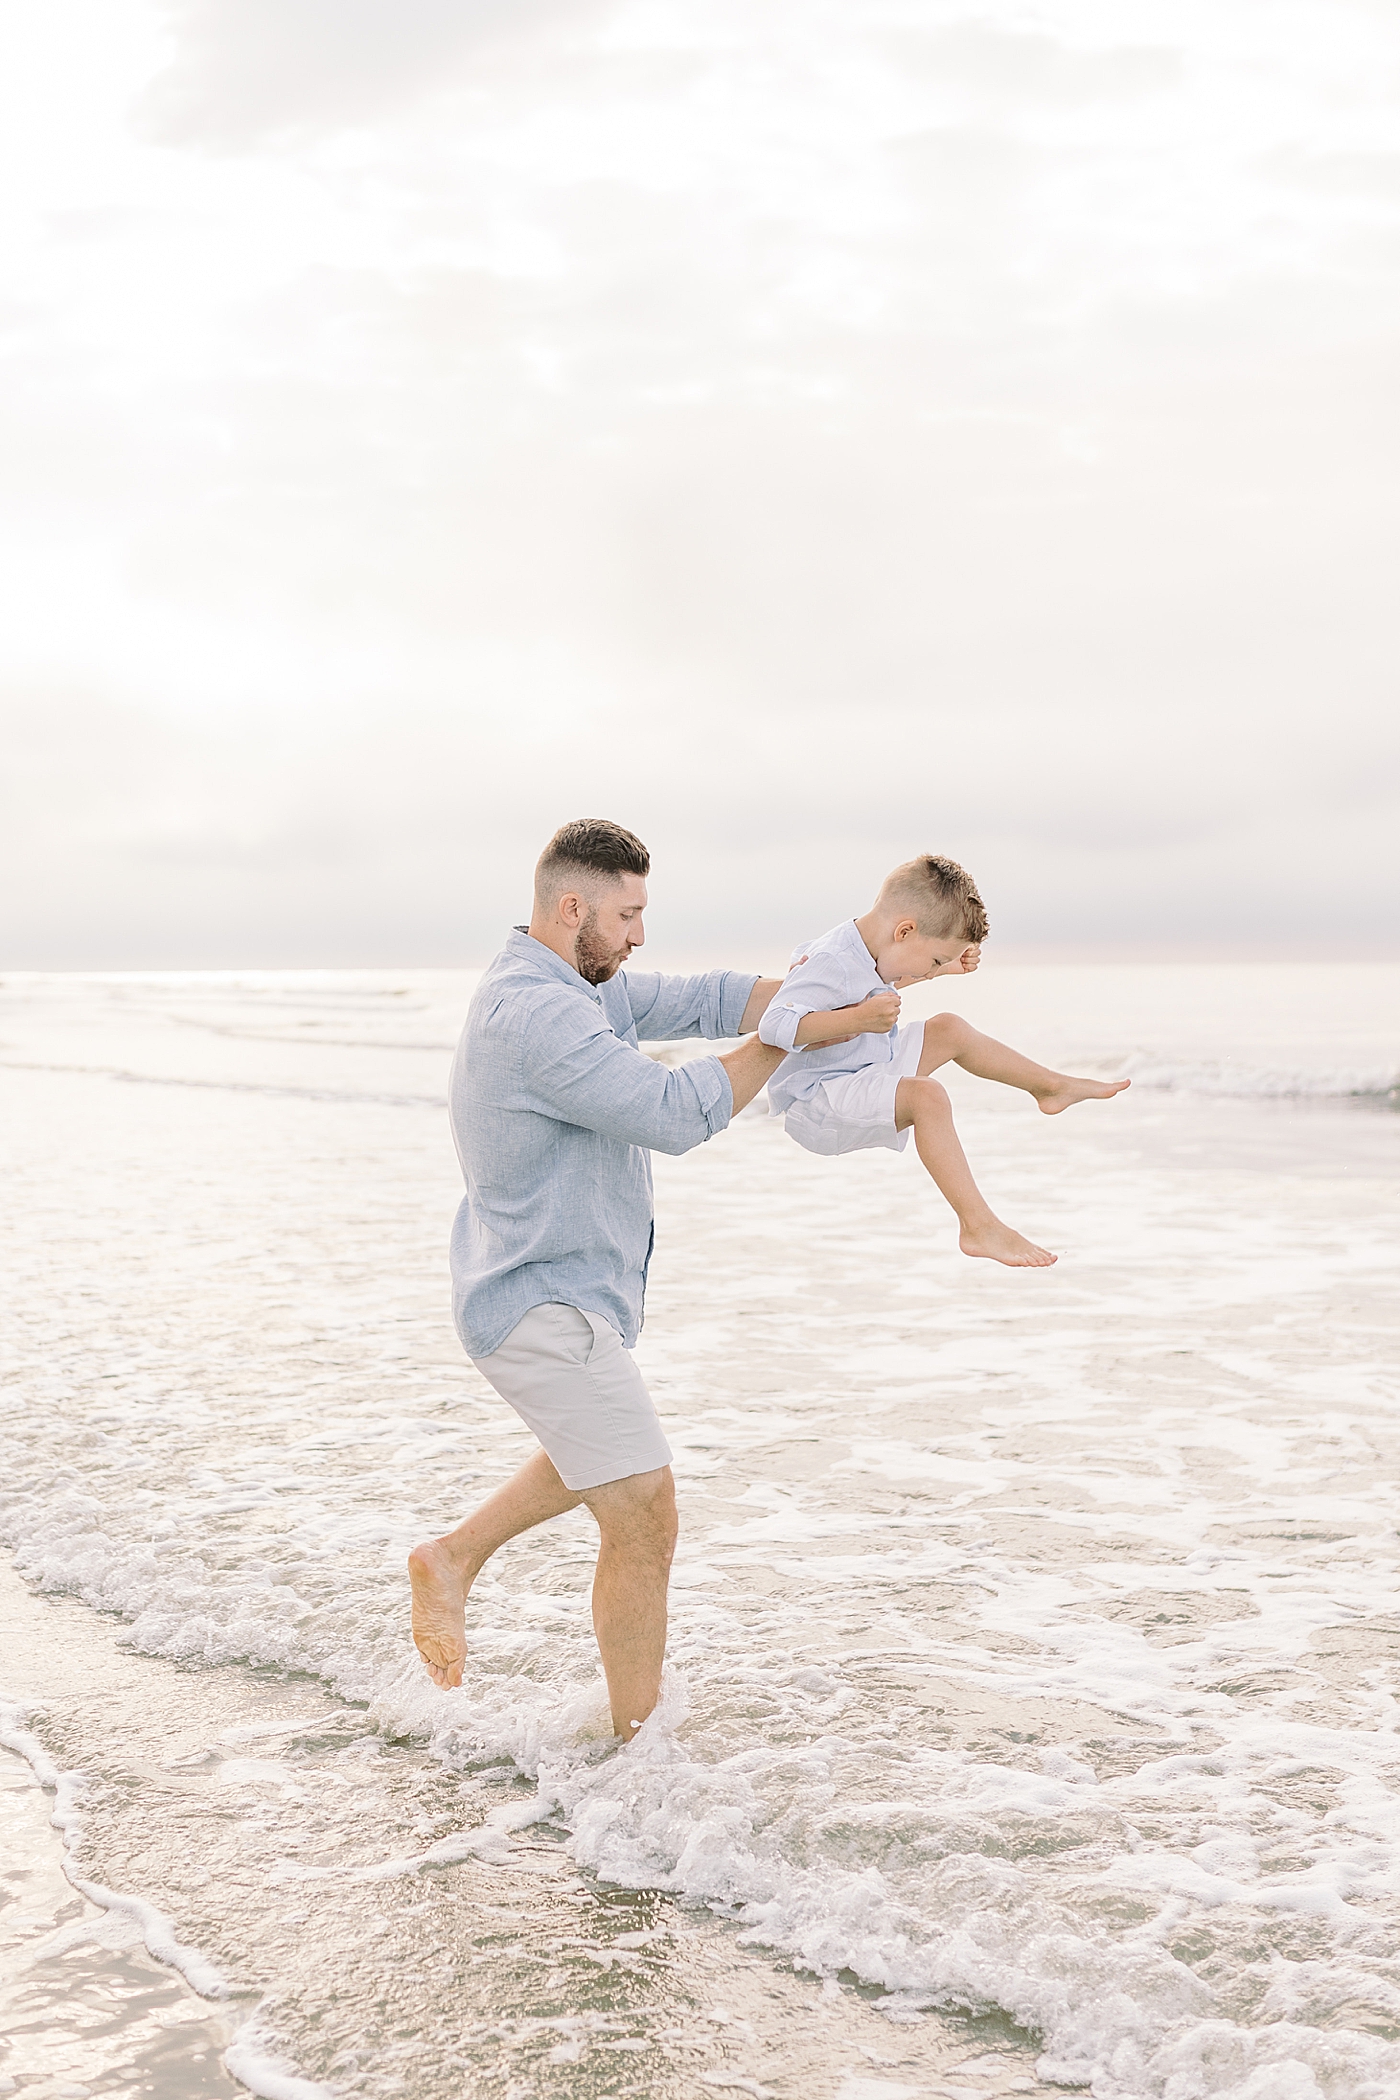 Dad playing with his little boy in the ocean | Preparing for Family Beach Session with Caitlyn Motycka